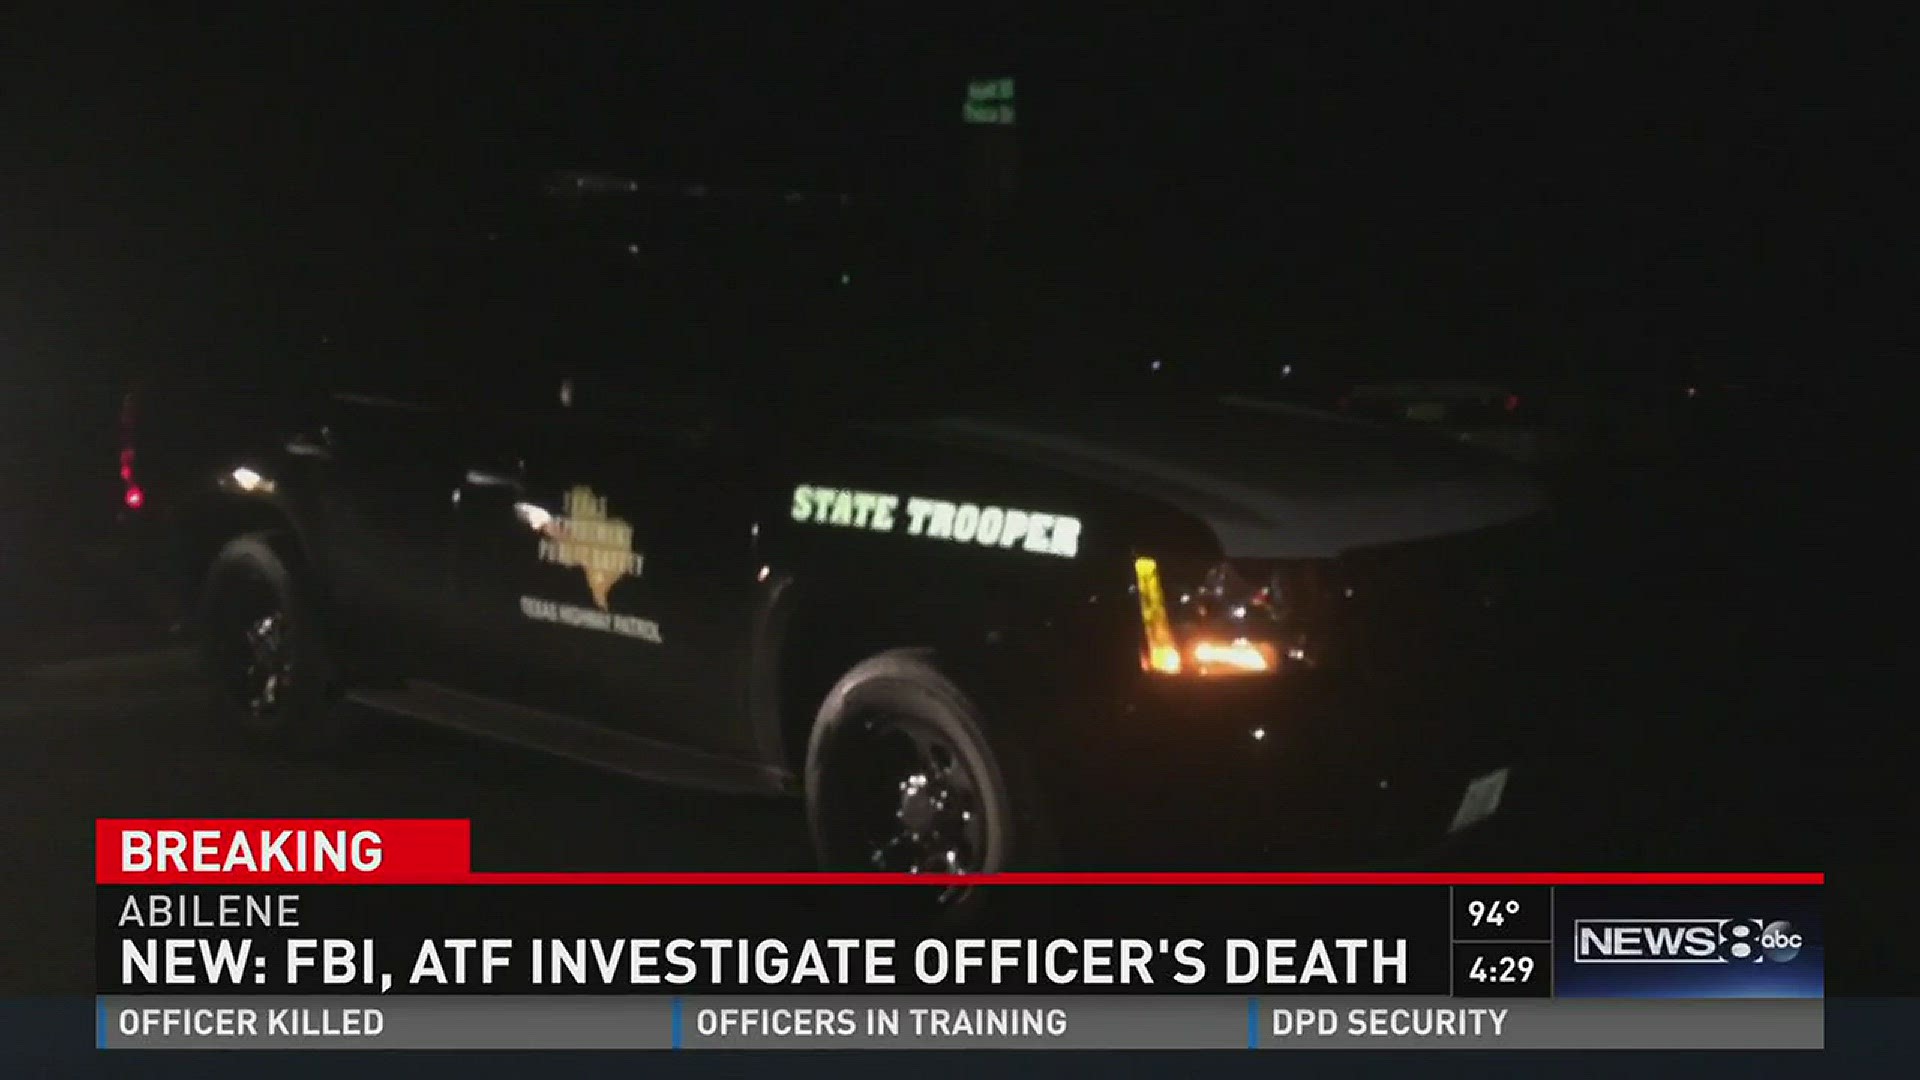 Off-duty Officer Don Allen was found dead at his home east of Abilene on Monday night.